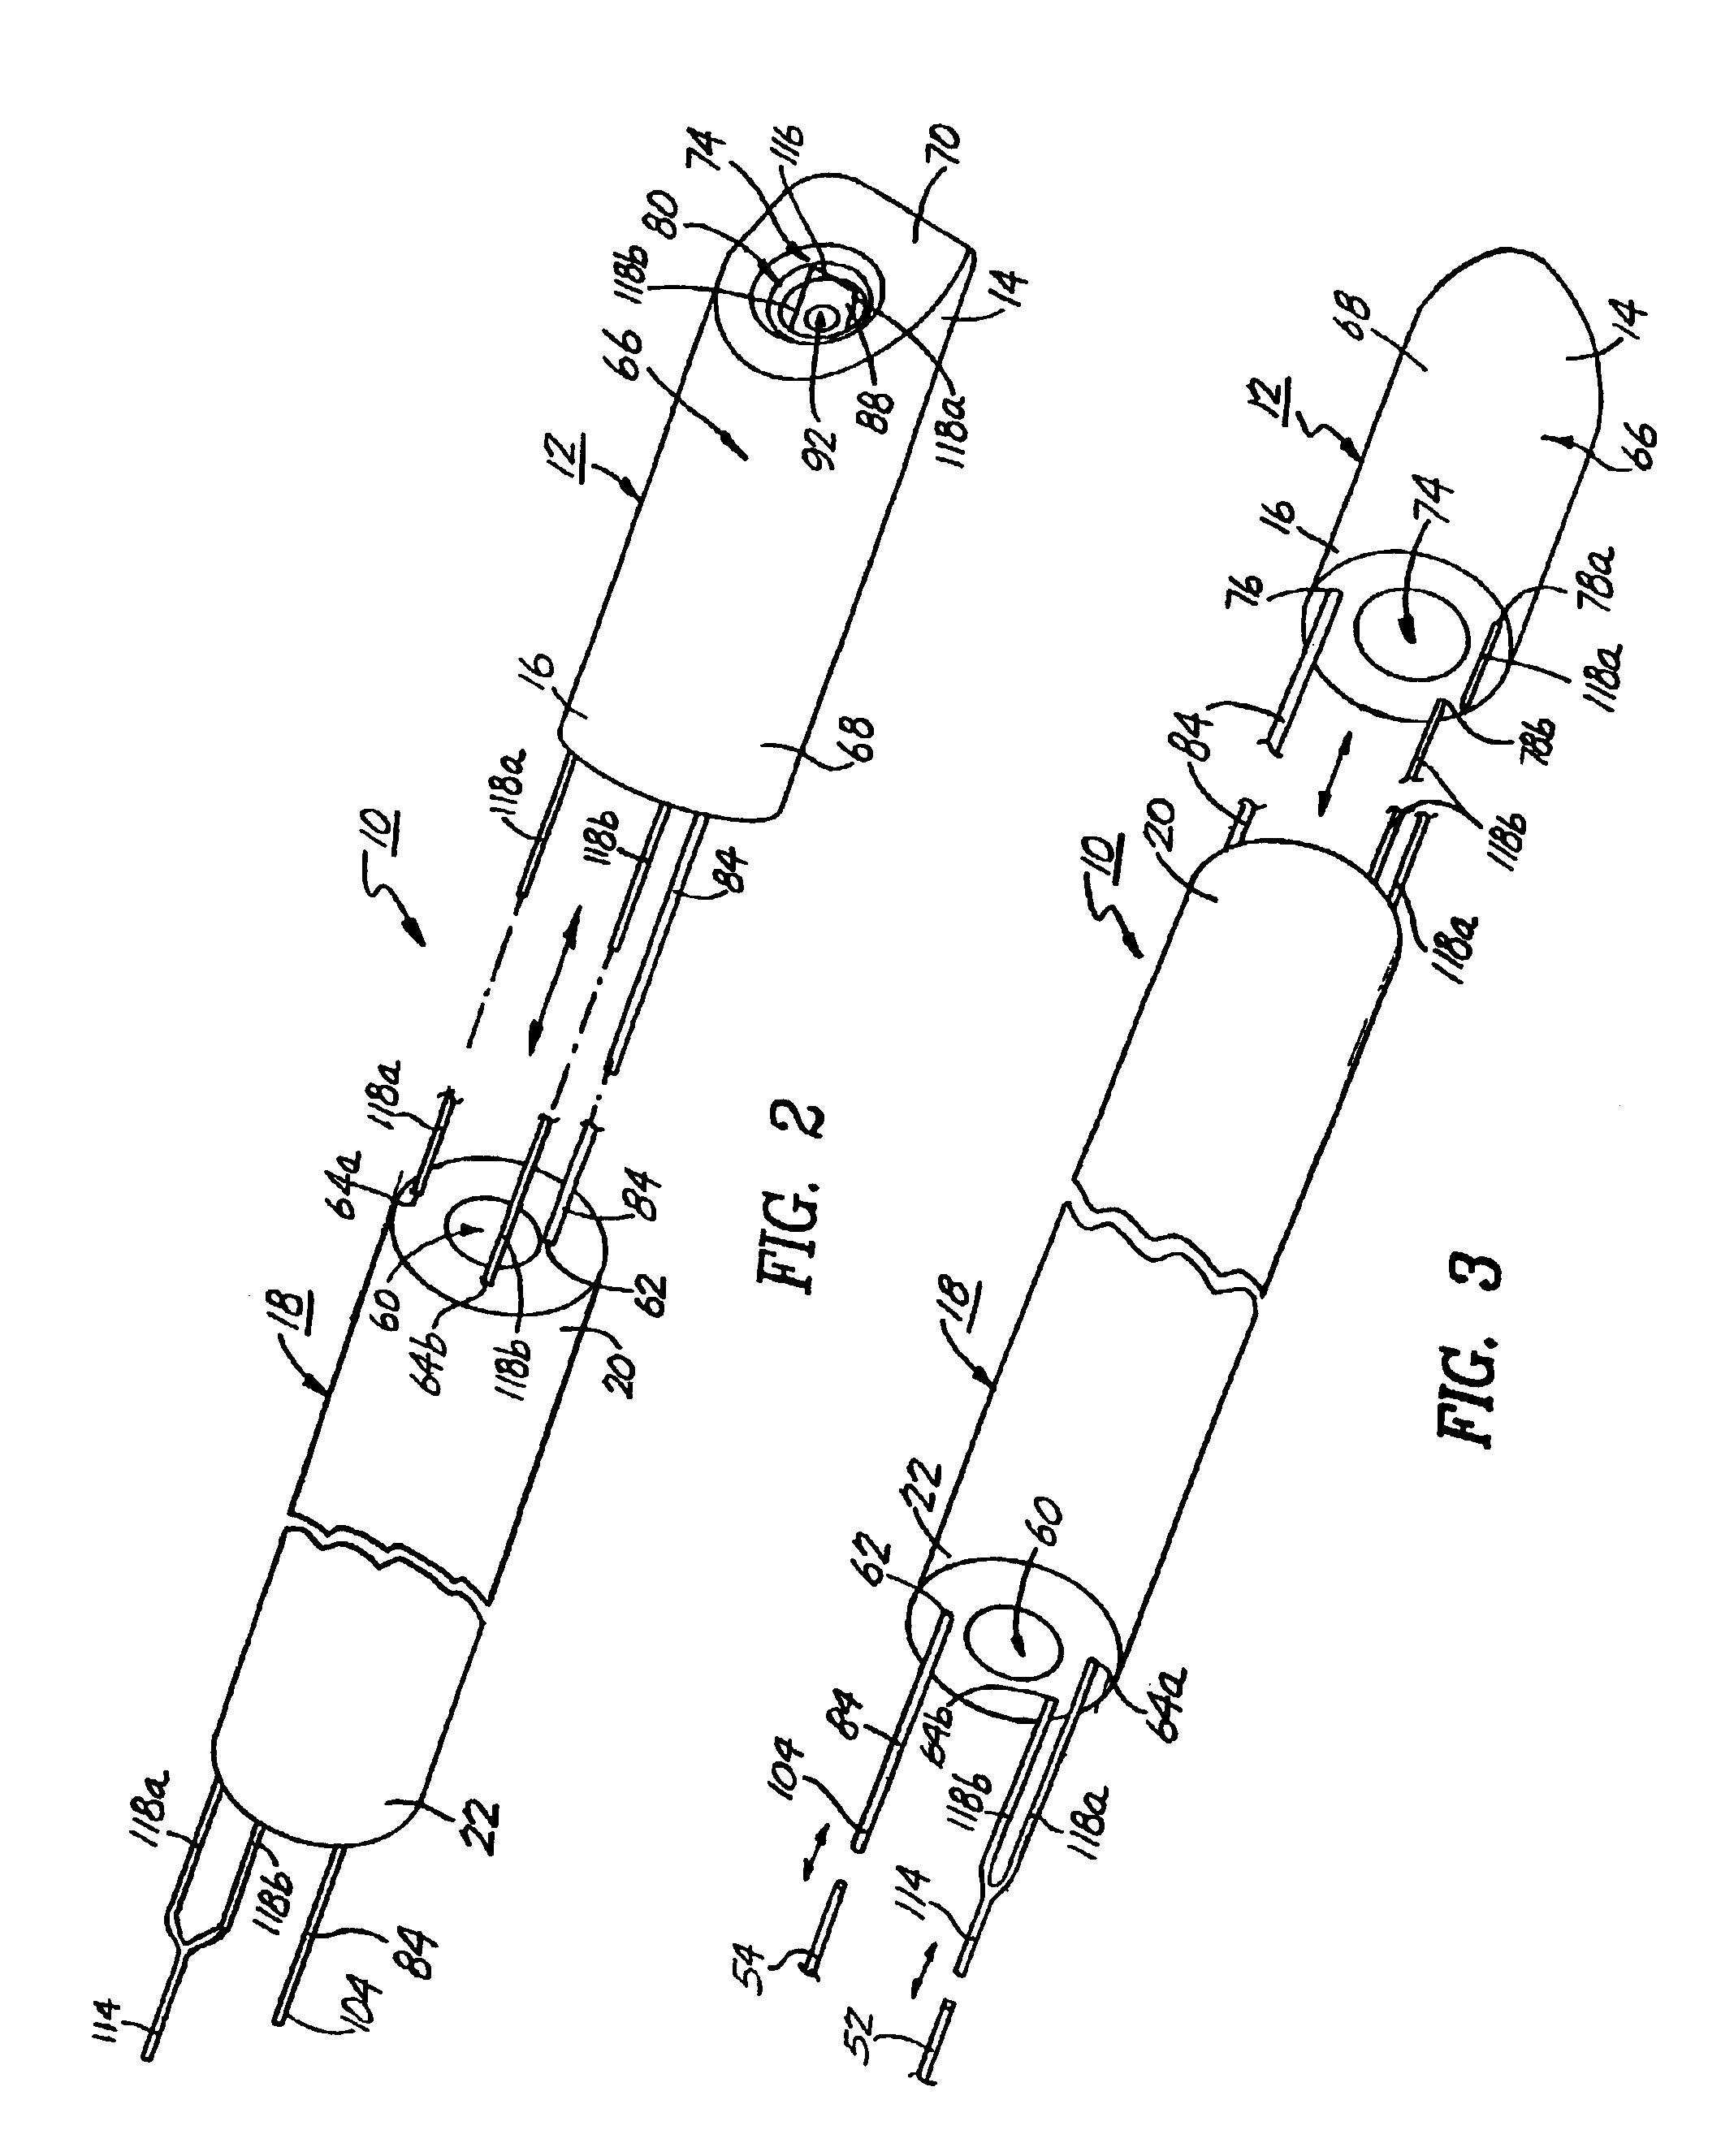 Bipolar RF excision and aspiration device and method for endometriosis removal